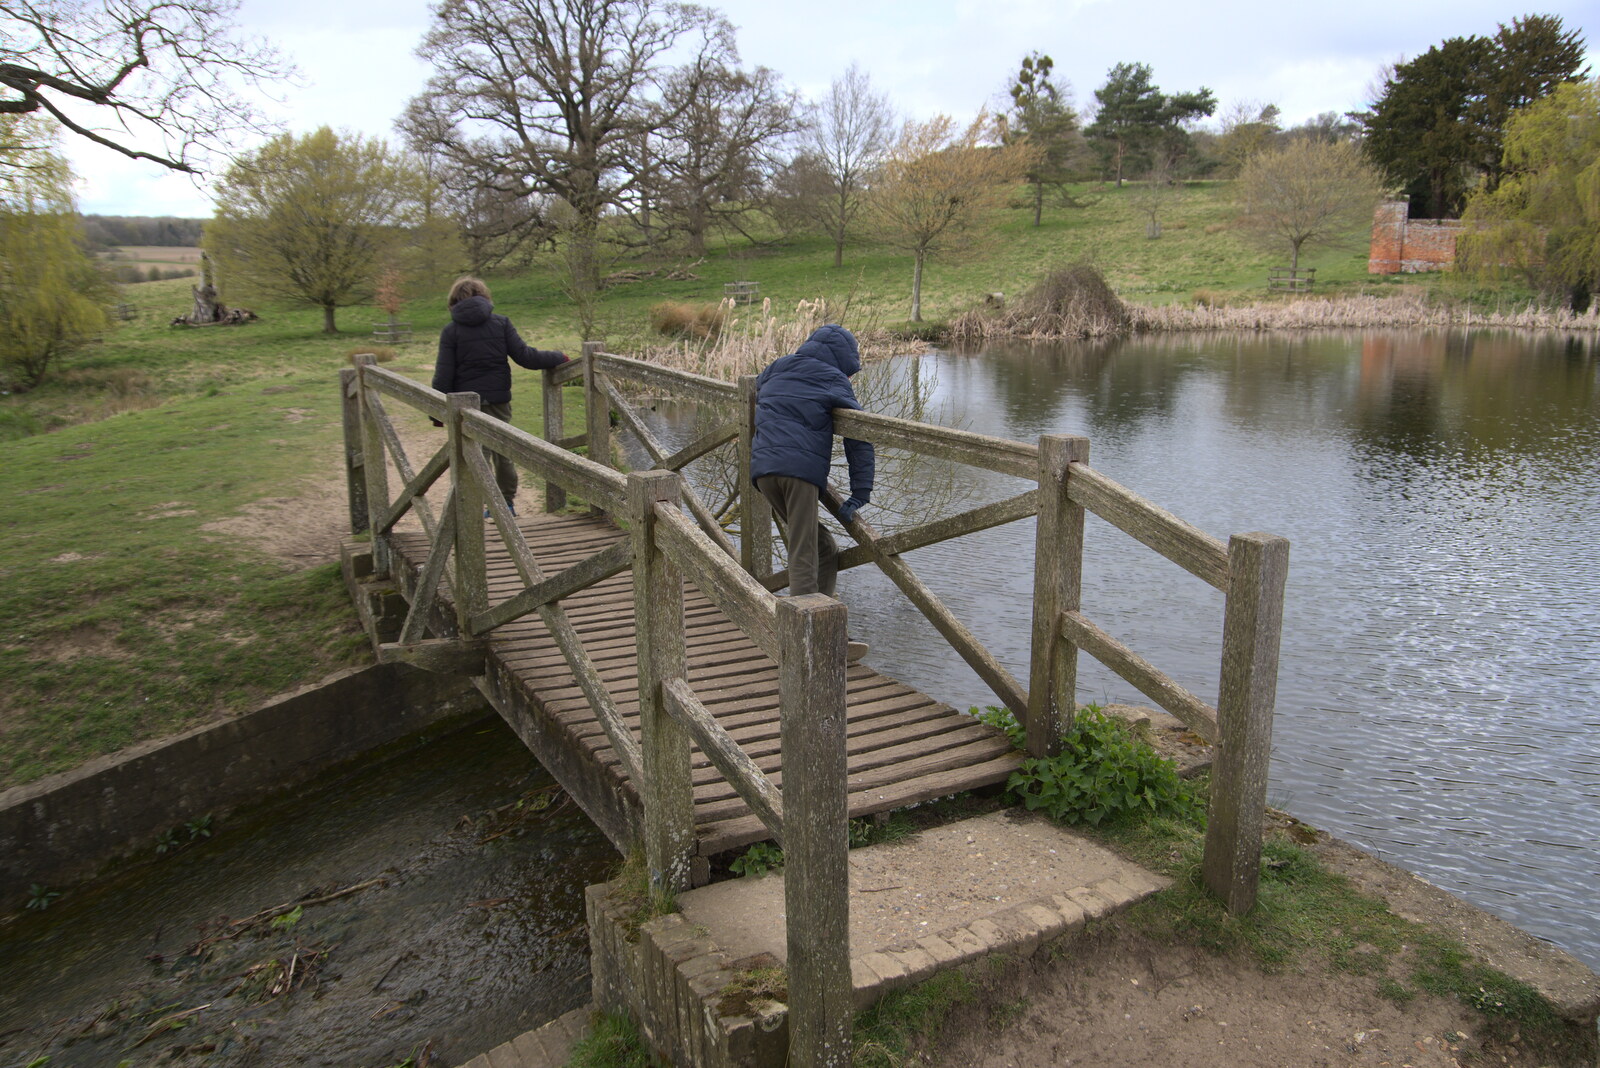 Fred and Harry on the bridge from A Return to Ickworth House, Horringer, Suffolk - 11th April 2021